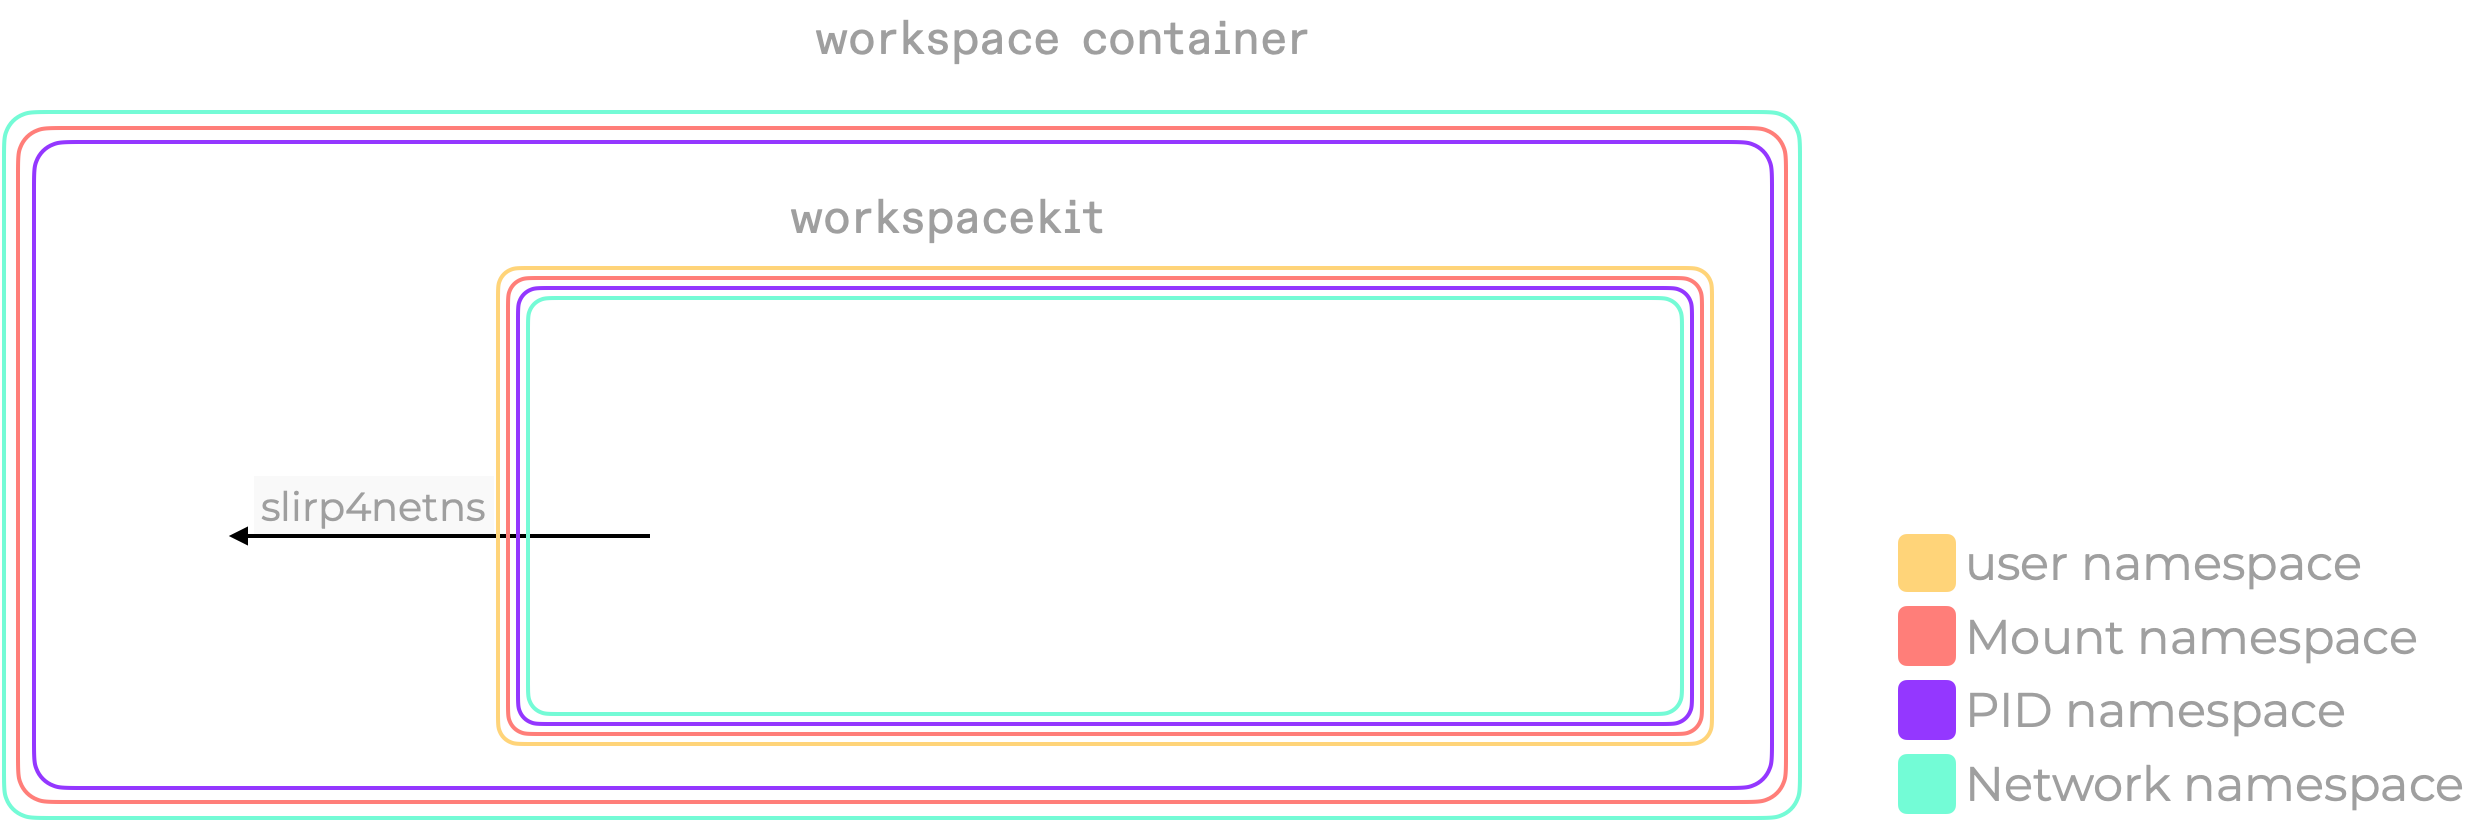 workspace-wide network namespace